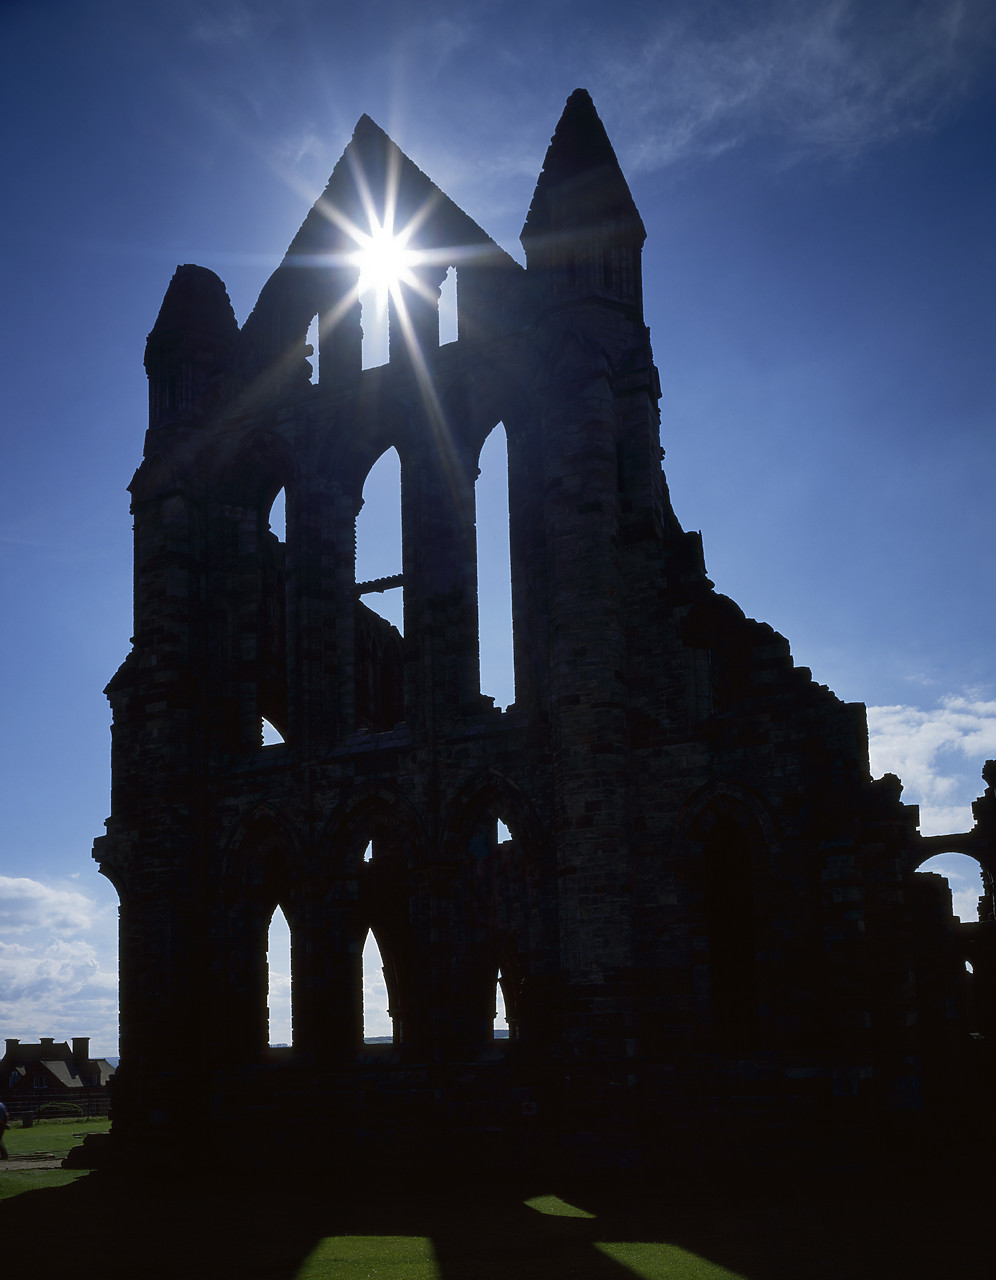 #881465-1 - Whitby Abbey in Silhouette, North Yorkshire, England